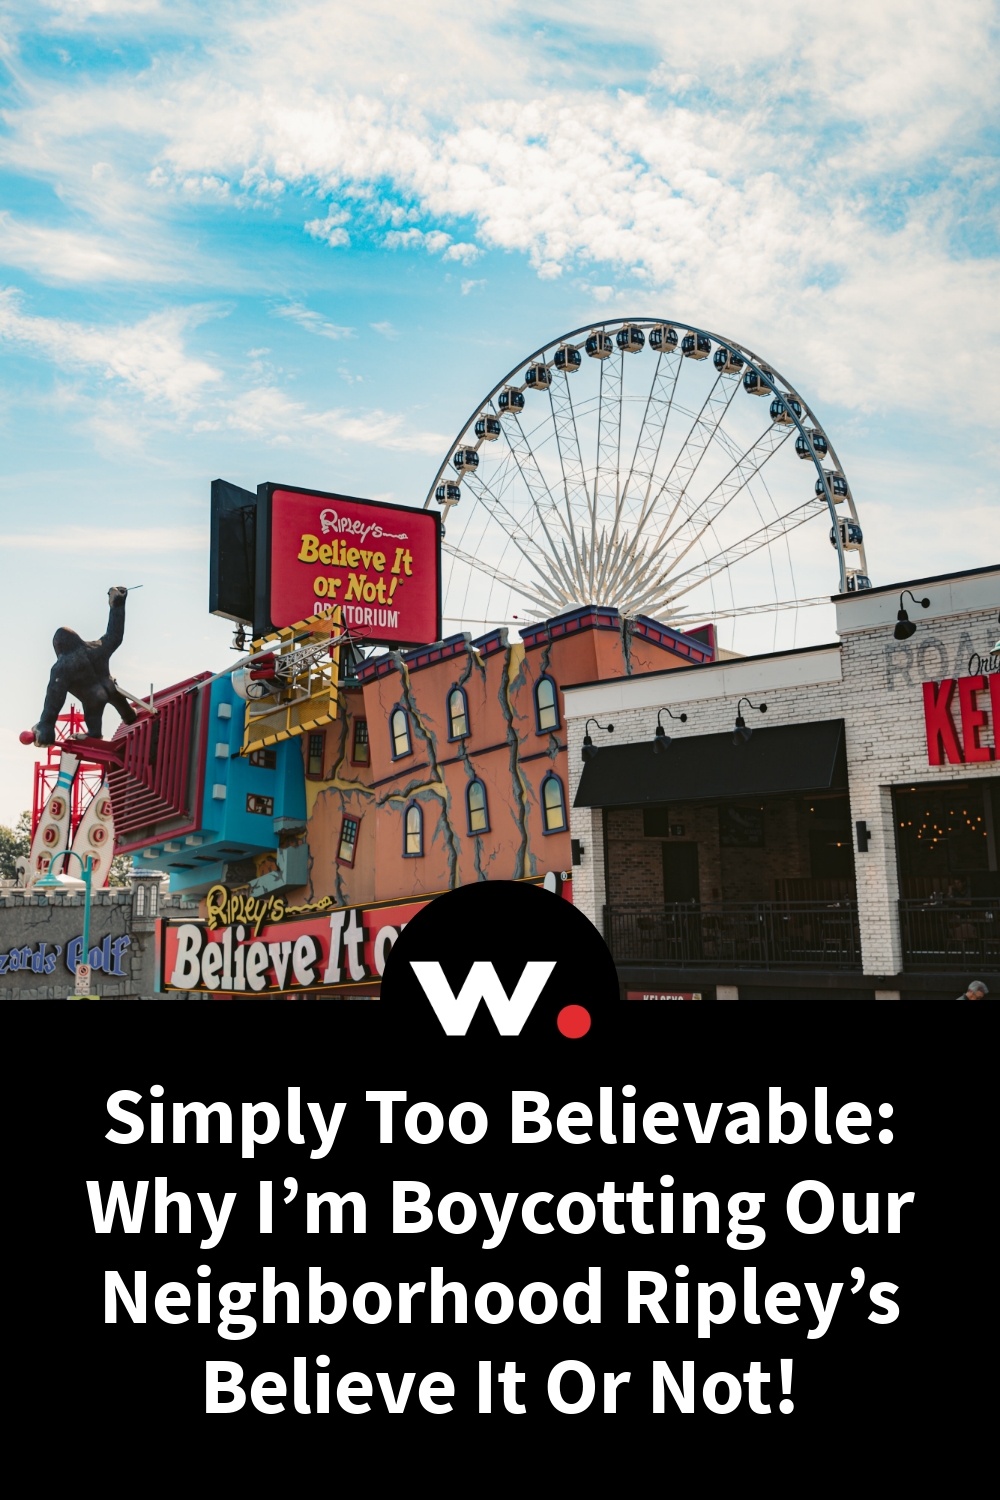 Simply Too Believable: Why I’m Boycotting Our Neighborhood Ripley’s Believe It Or Not!